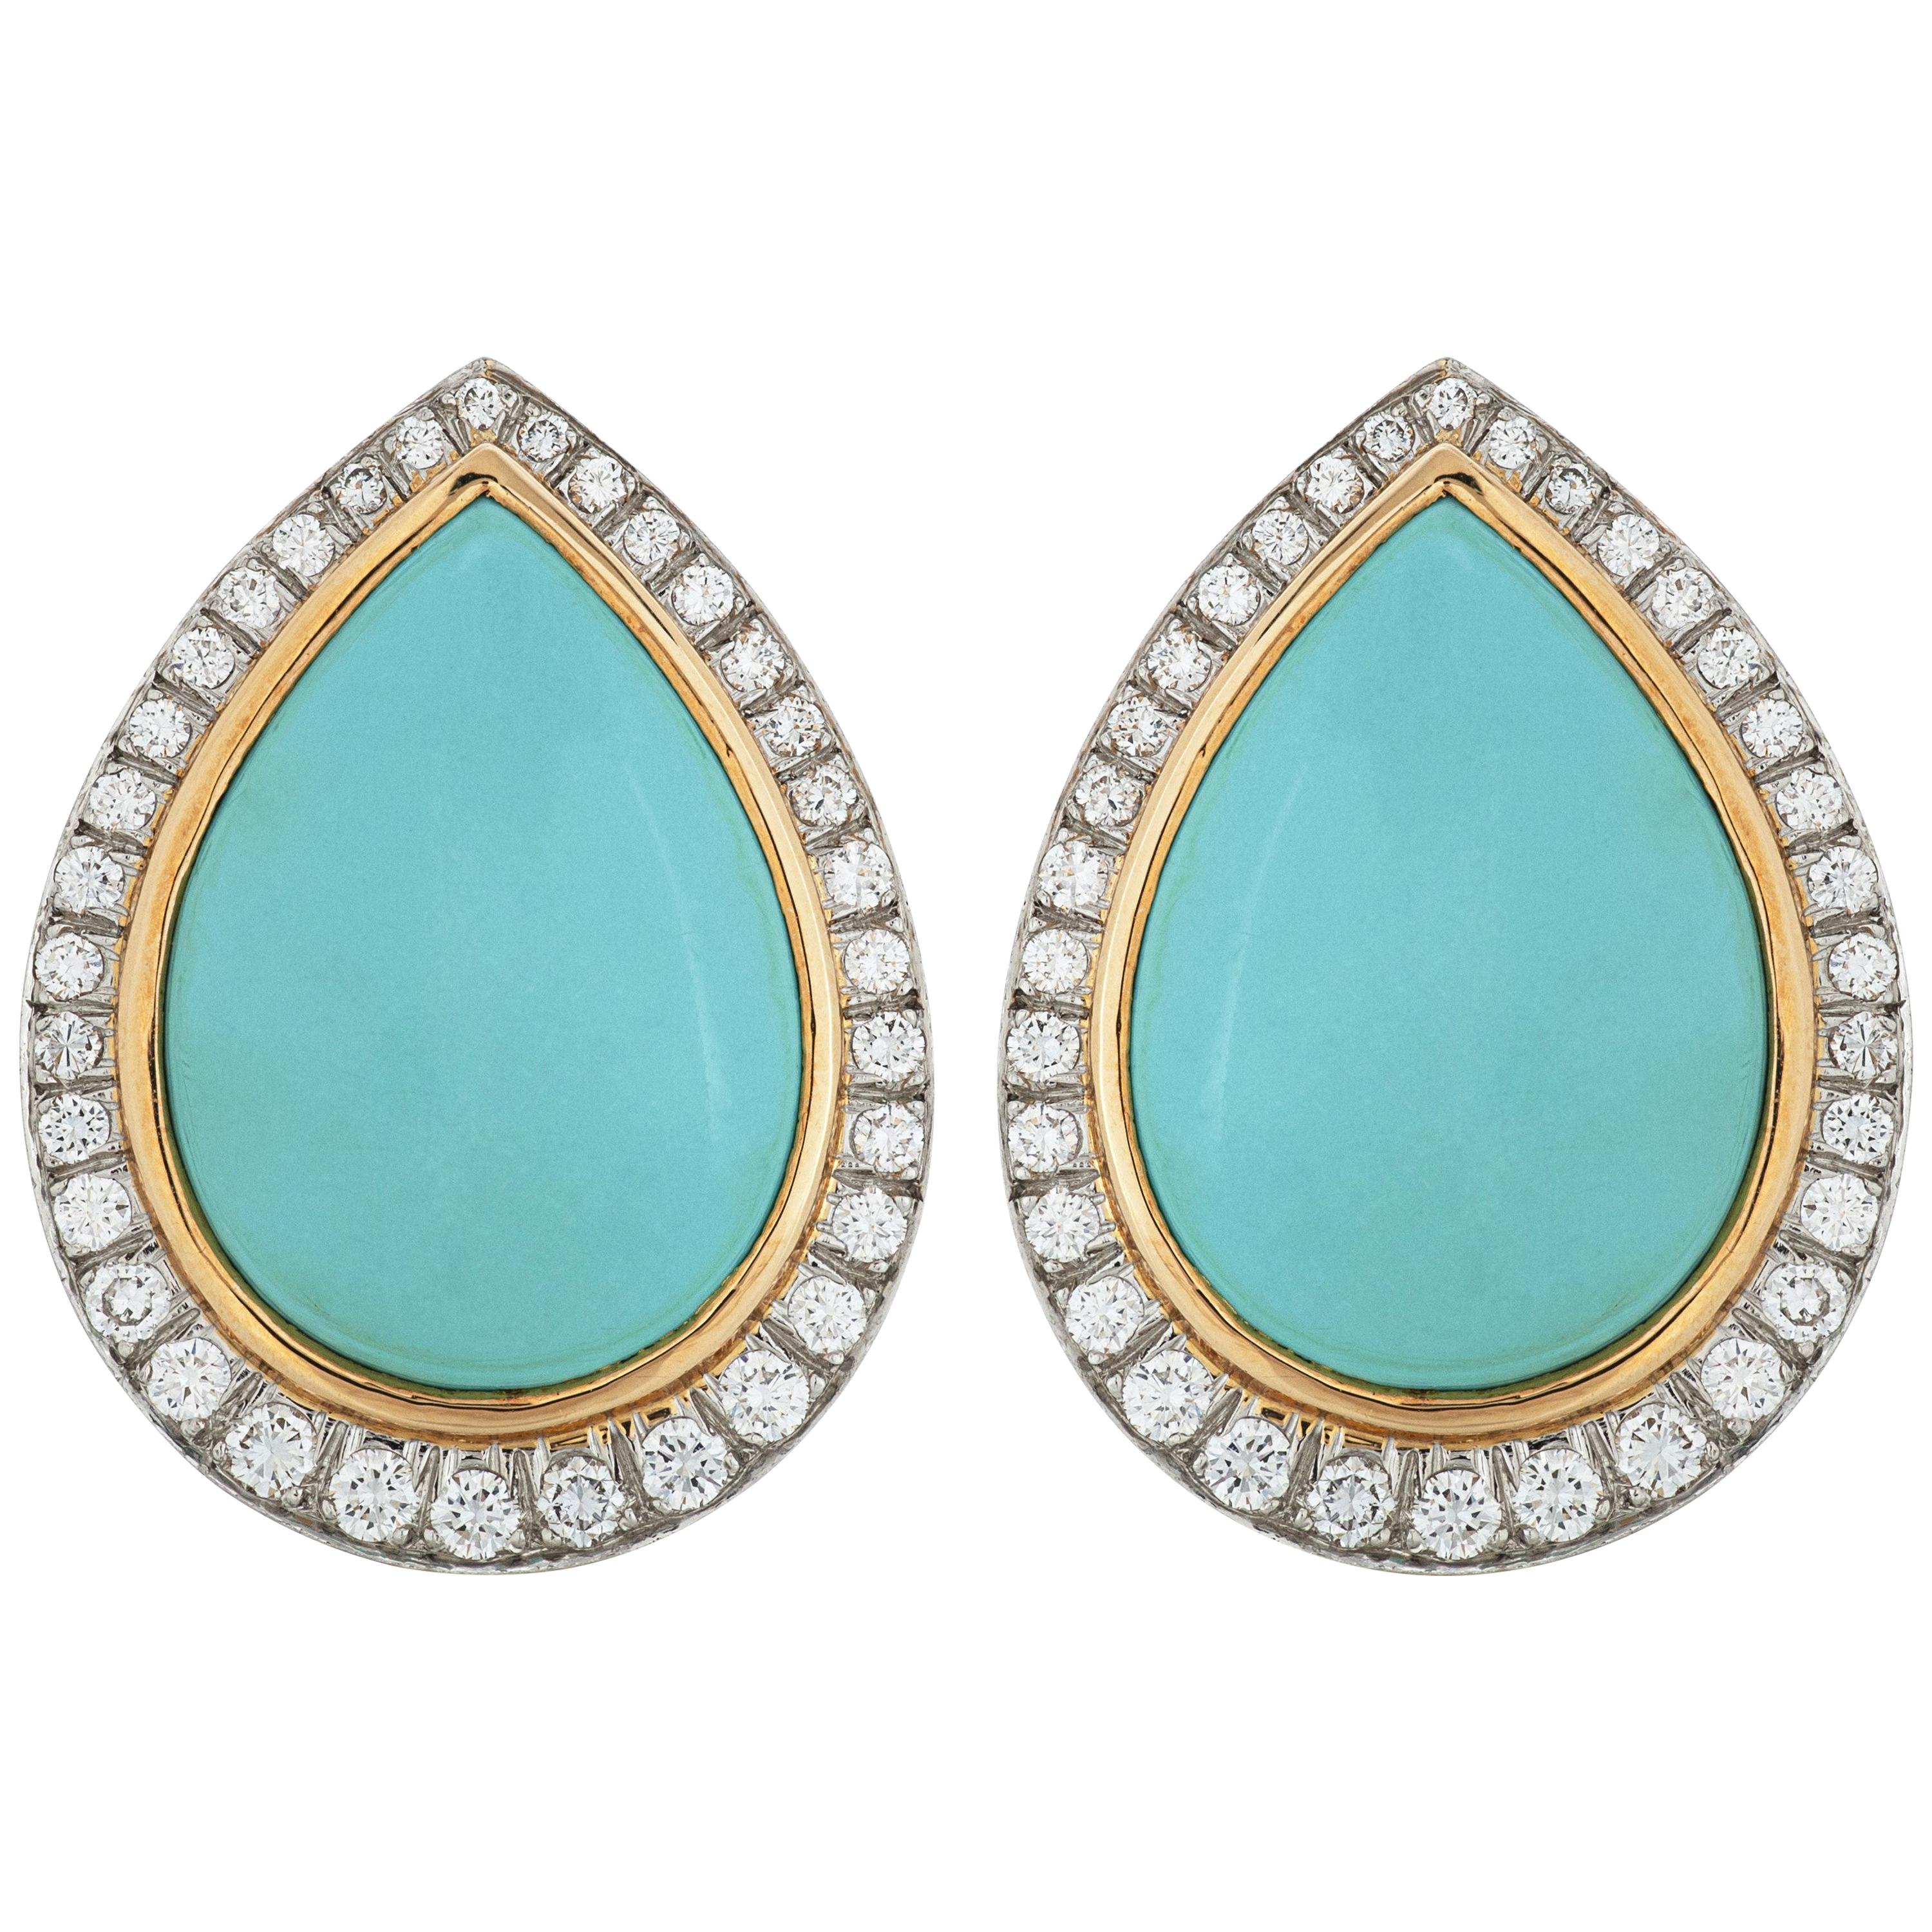 David Webb Cabochon Turquoise and Diamond Earrings in 18 Karat Gold and Platinum